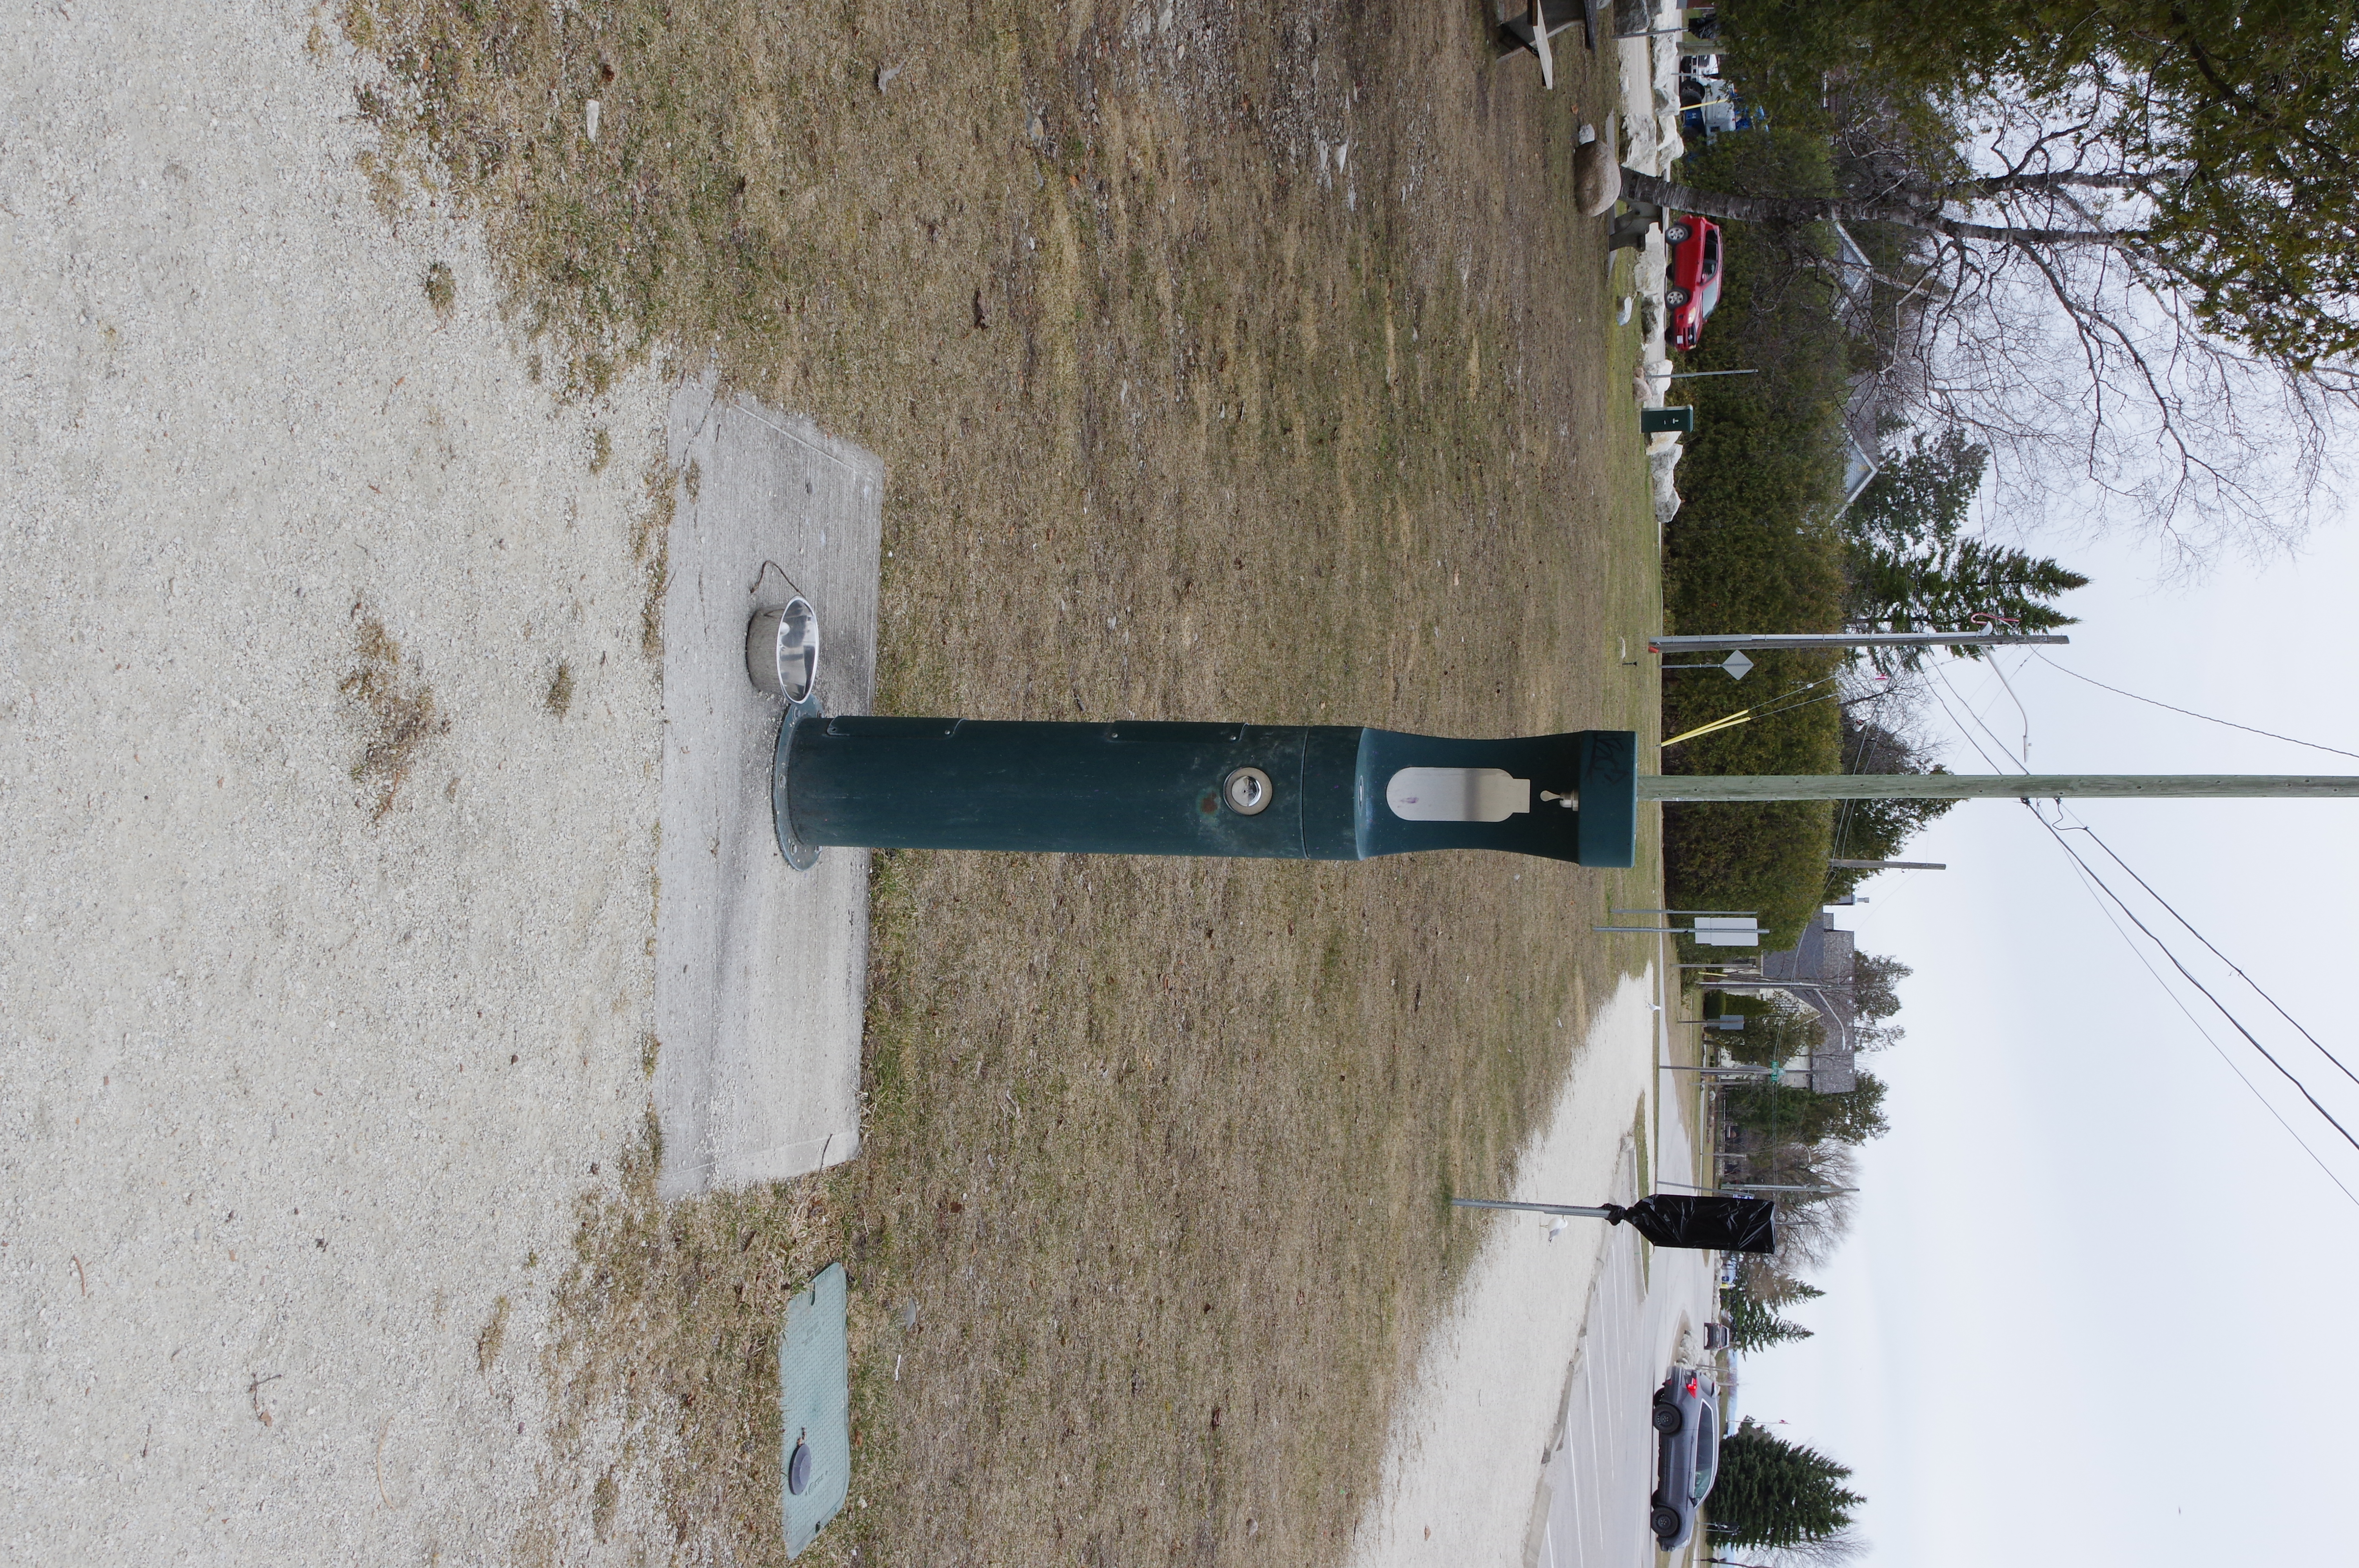  located on the south side of St. Lawrence Street lies the water station